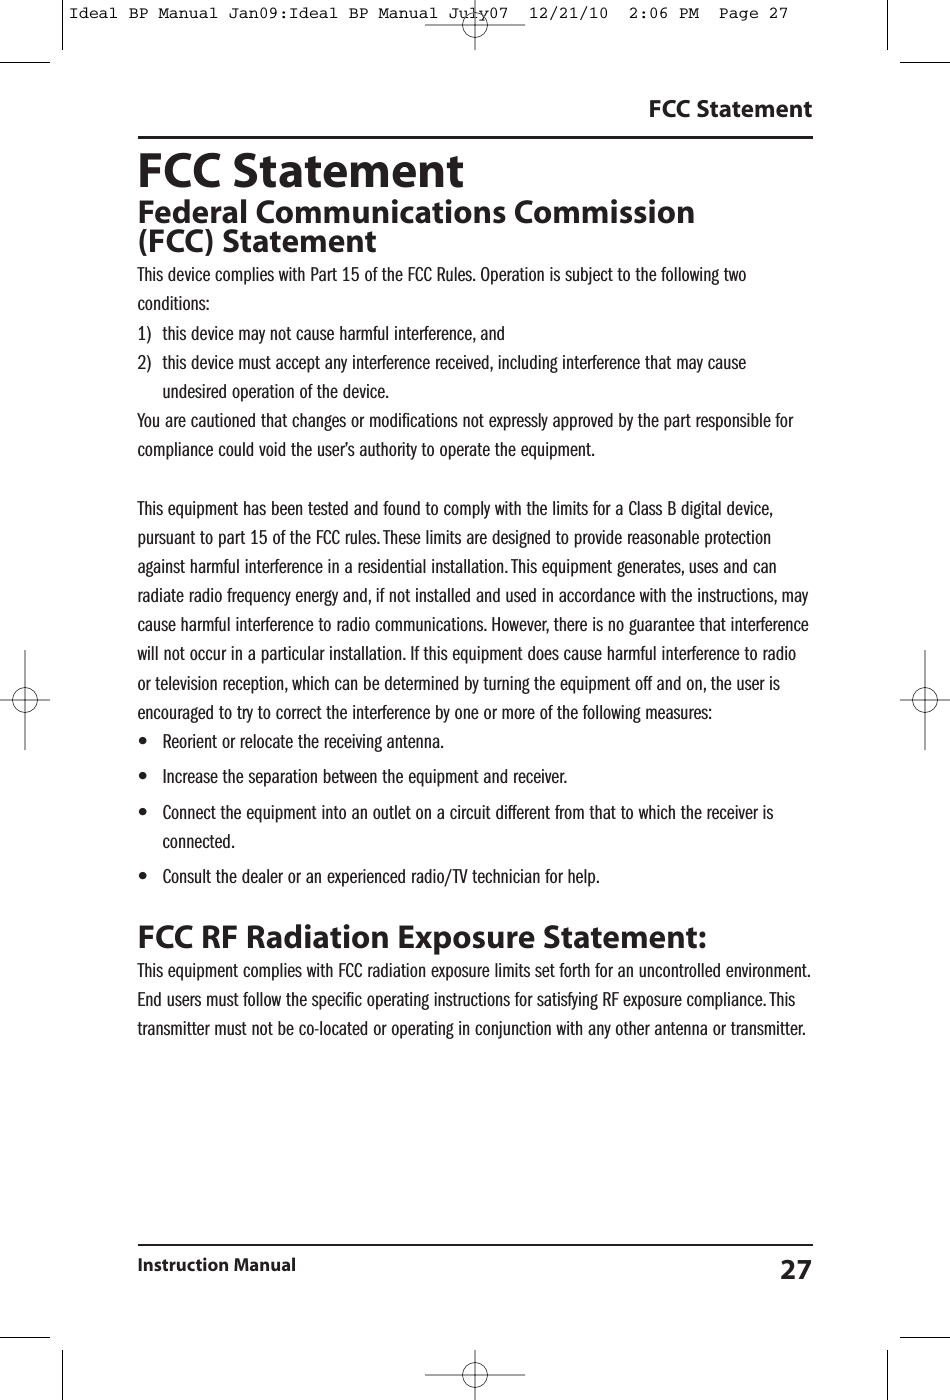 FCC StatementFederal Communications Commission(FCC) StatementThis device complies with Part 15 of the FCC Rules. Operation is subject to the following twoconditions:1) this device may not cause harmful interference, and2) this device must accept any interference received, including interference that may causeundesired operation of the device.You are cautioned that changes or modifications not expressly approved by the part responsible forcompliance could void the user’s authority to operate the equipment.This equipment has been tested and found to comply with the limits for a Class B digital device,pursuant to part 15 of the FCC rules. These limits are designed to provide reasonable protectionagainst harmful interference in a residential installation. This equipment generates, uses and canradiate radio frequency energy and, if not installed and used in accordance with the instructions, maycause harmful interference to radio communications. However, there is no guarantee that interferencewill not occur in a particular installation. If this equipment does cause harmful interference to radioor television reception, which can be determined by turning the equipment off and on, the user isencouraged to try to correct the interference by one or more of the following measures:•Reorient or relocate the receiving antenna.•Increase the separation between the equipment and receiver.•Connect the equipment into an outlet on a circuit different from that to which the receiver isconnected.•Consult the dealer or an experienced radio/TV technician for help.FCC RF Radiation Exposure Statement:This equipment complies with FCC radiation exposure limits set forth for an uncontrolled environment.End users must follow the specific operating instructions for satisfying RF exposure compliance. Thistransmitter must not be co-located or operating in conjunction with any other antenna or transmitter.FCC StatementInstruction Manual 27Ideal BP Manual Jan09:Ideal BP Manual July07  12/21/10  2:06 PM  Page 27